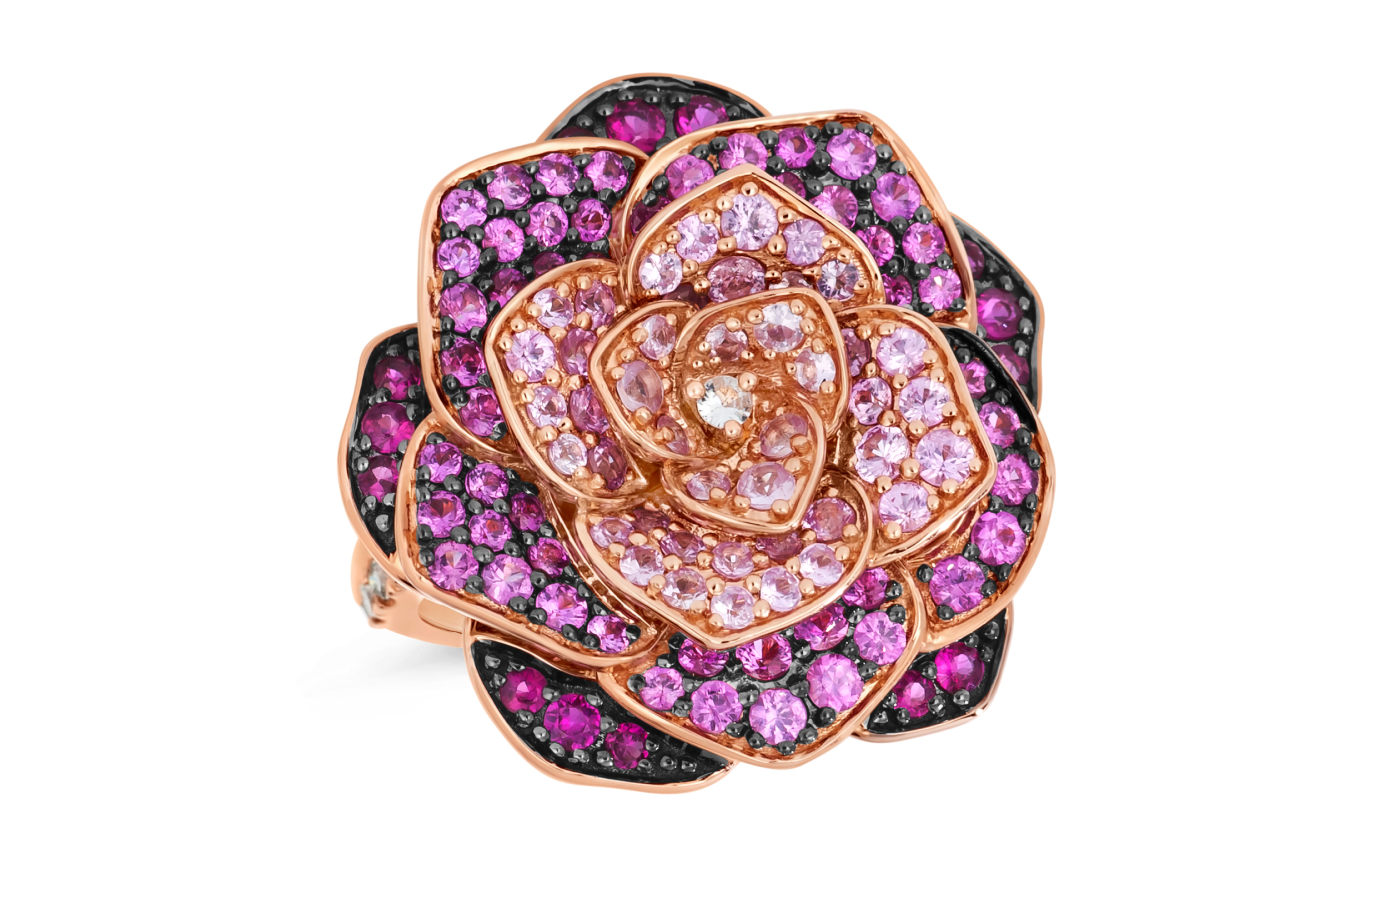 Le Vian Ombrè® ring with 2.37 carats of Strawberry Ombrè® Sapphires, Vanilla Sapphire™, and Nude Diamonds™ set in 14K Strawberry Gold®